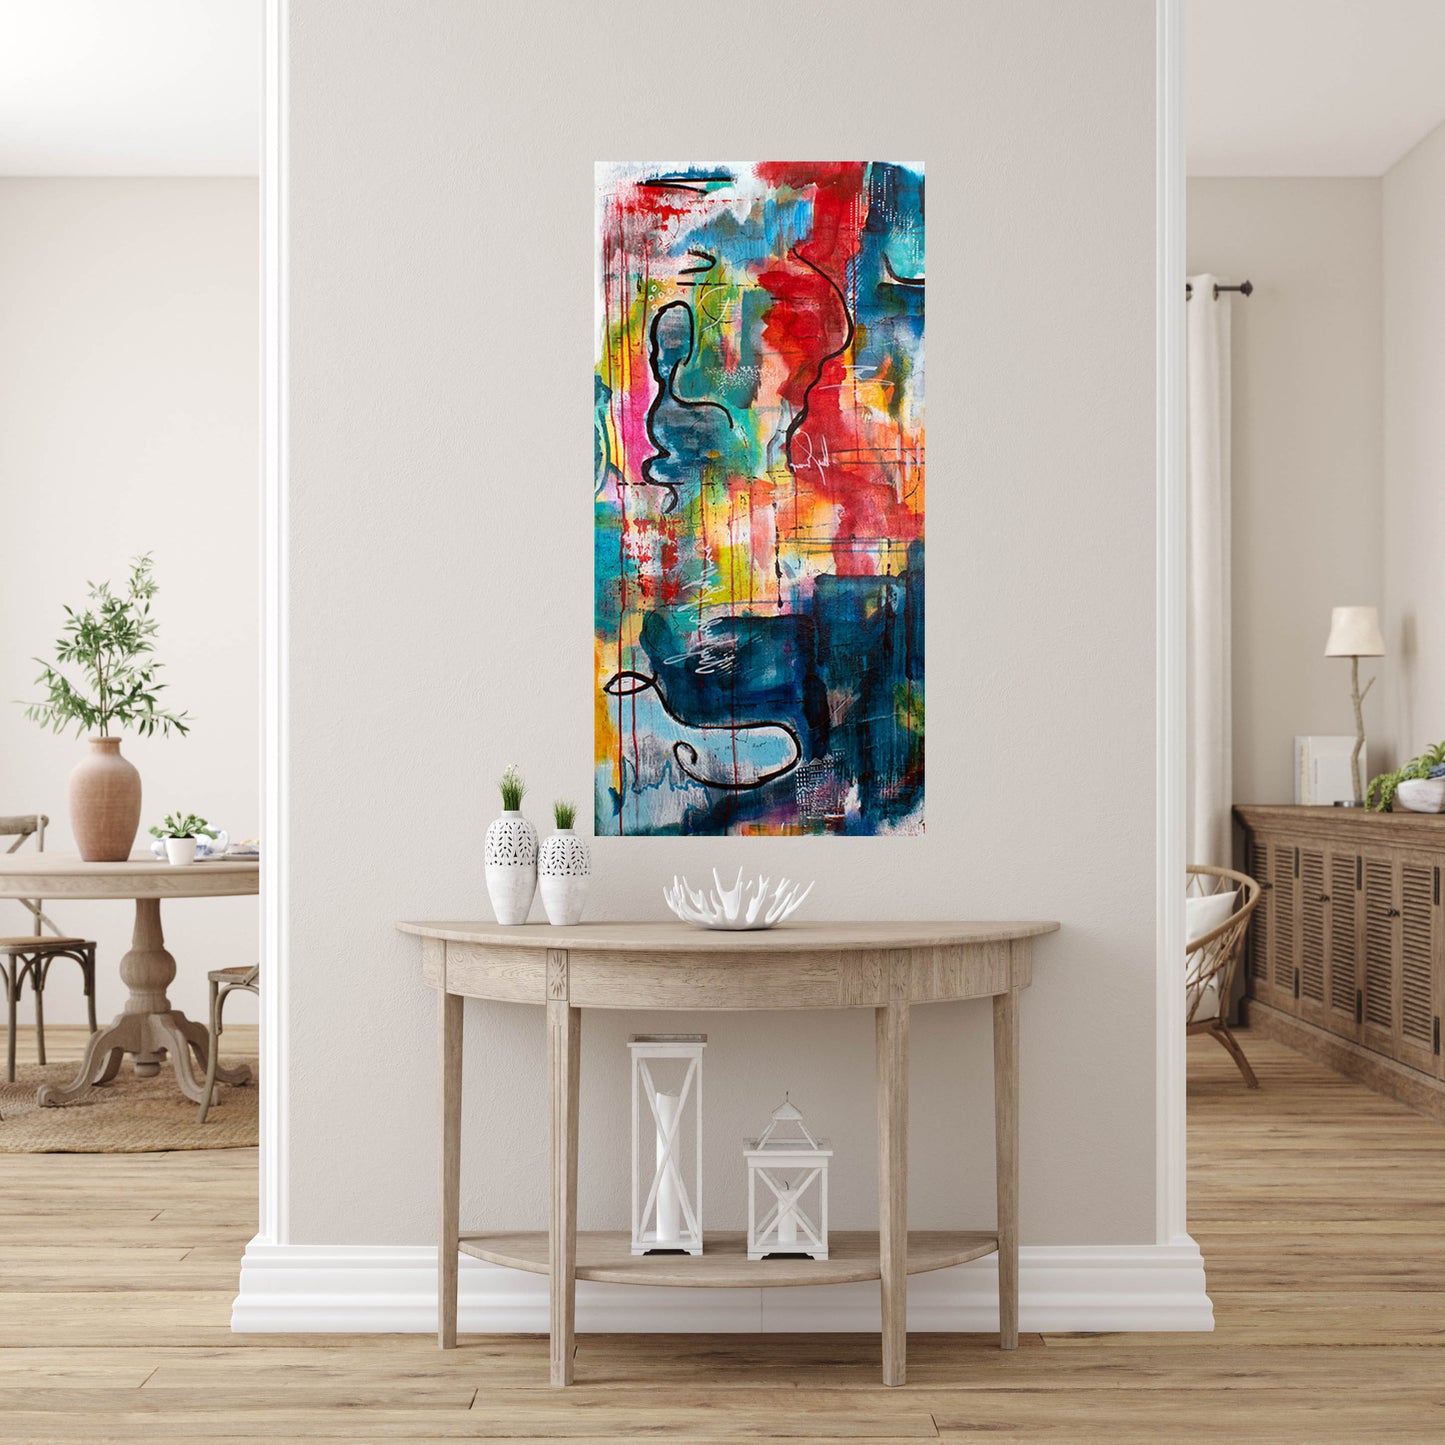 The Struggle - The Joy #3 (24x48 Gallery Wrapped Canvas) 10 months Interest Free  with ArtMoney